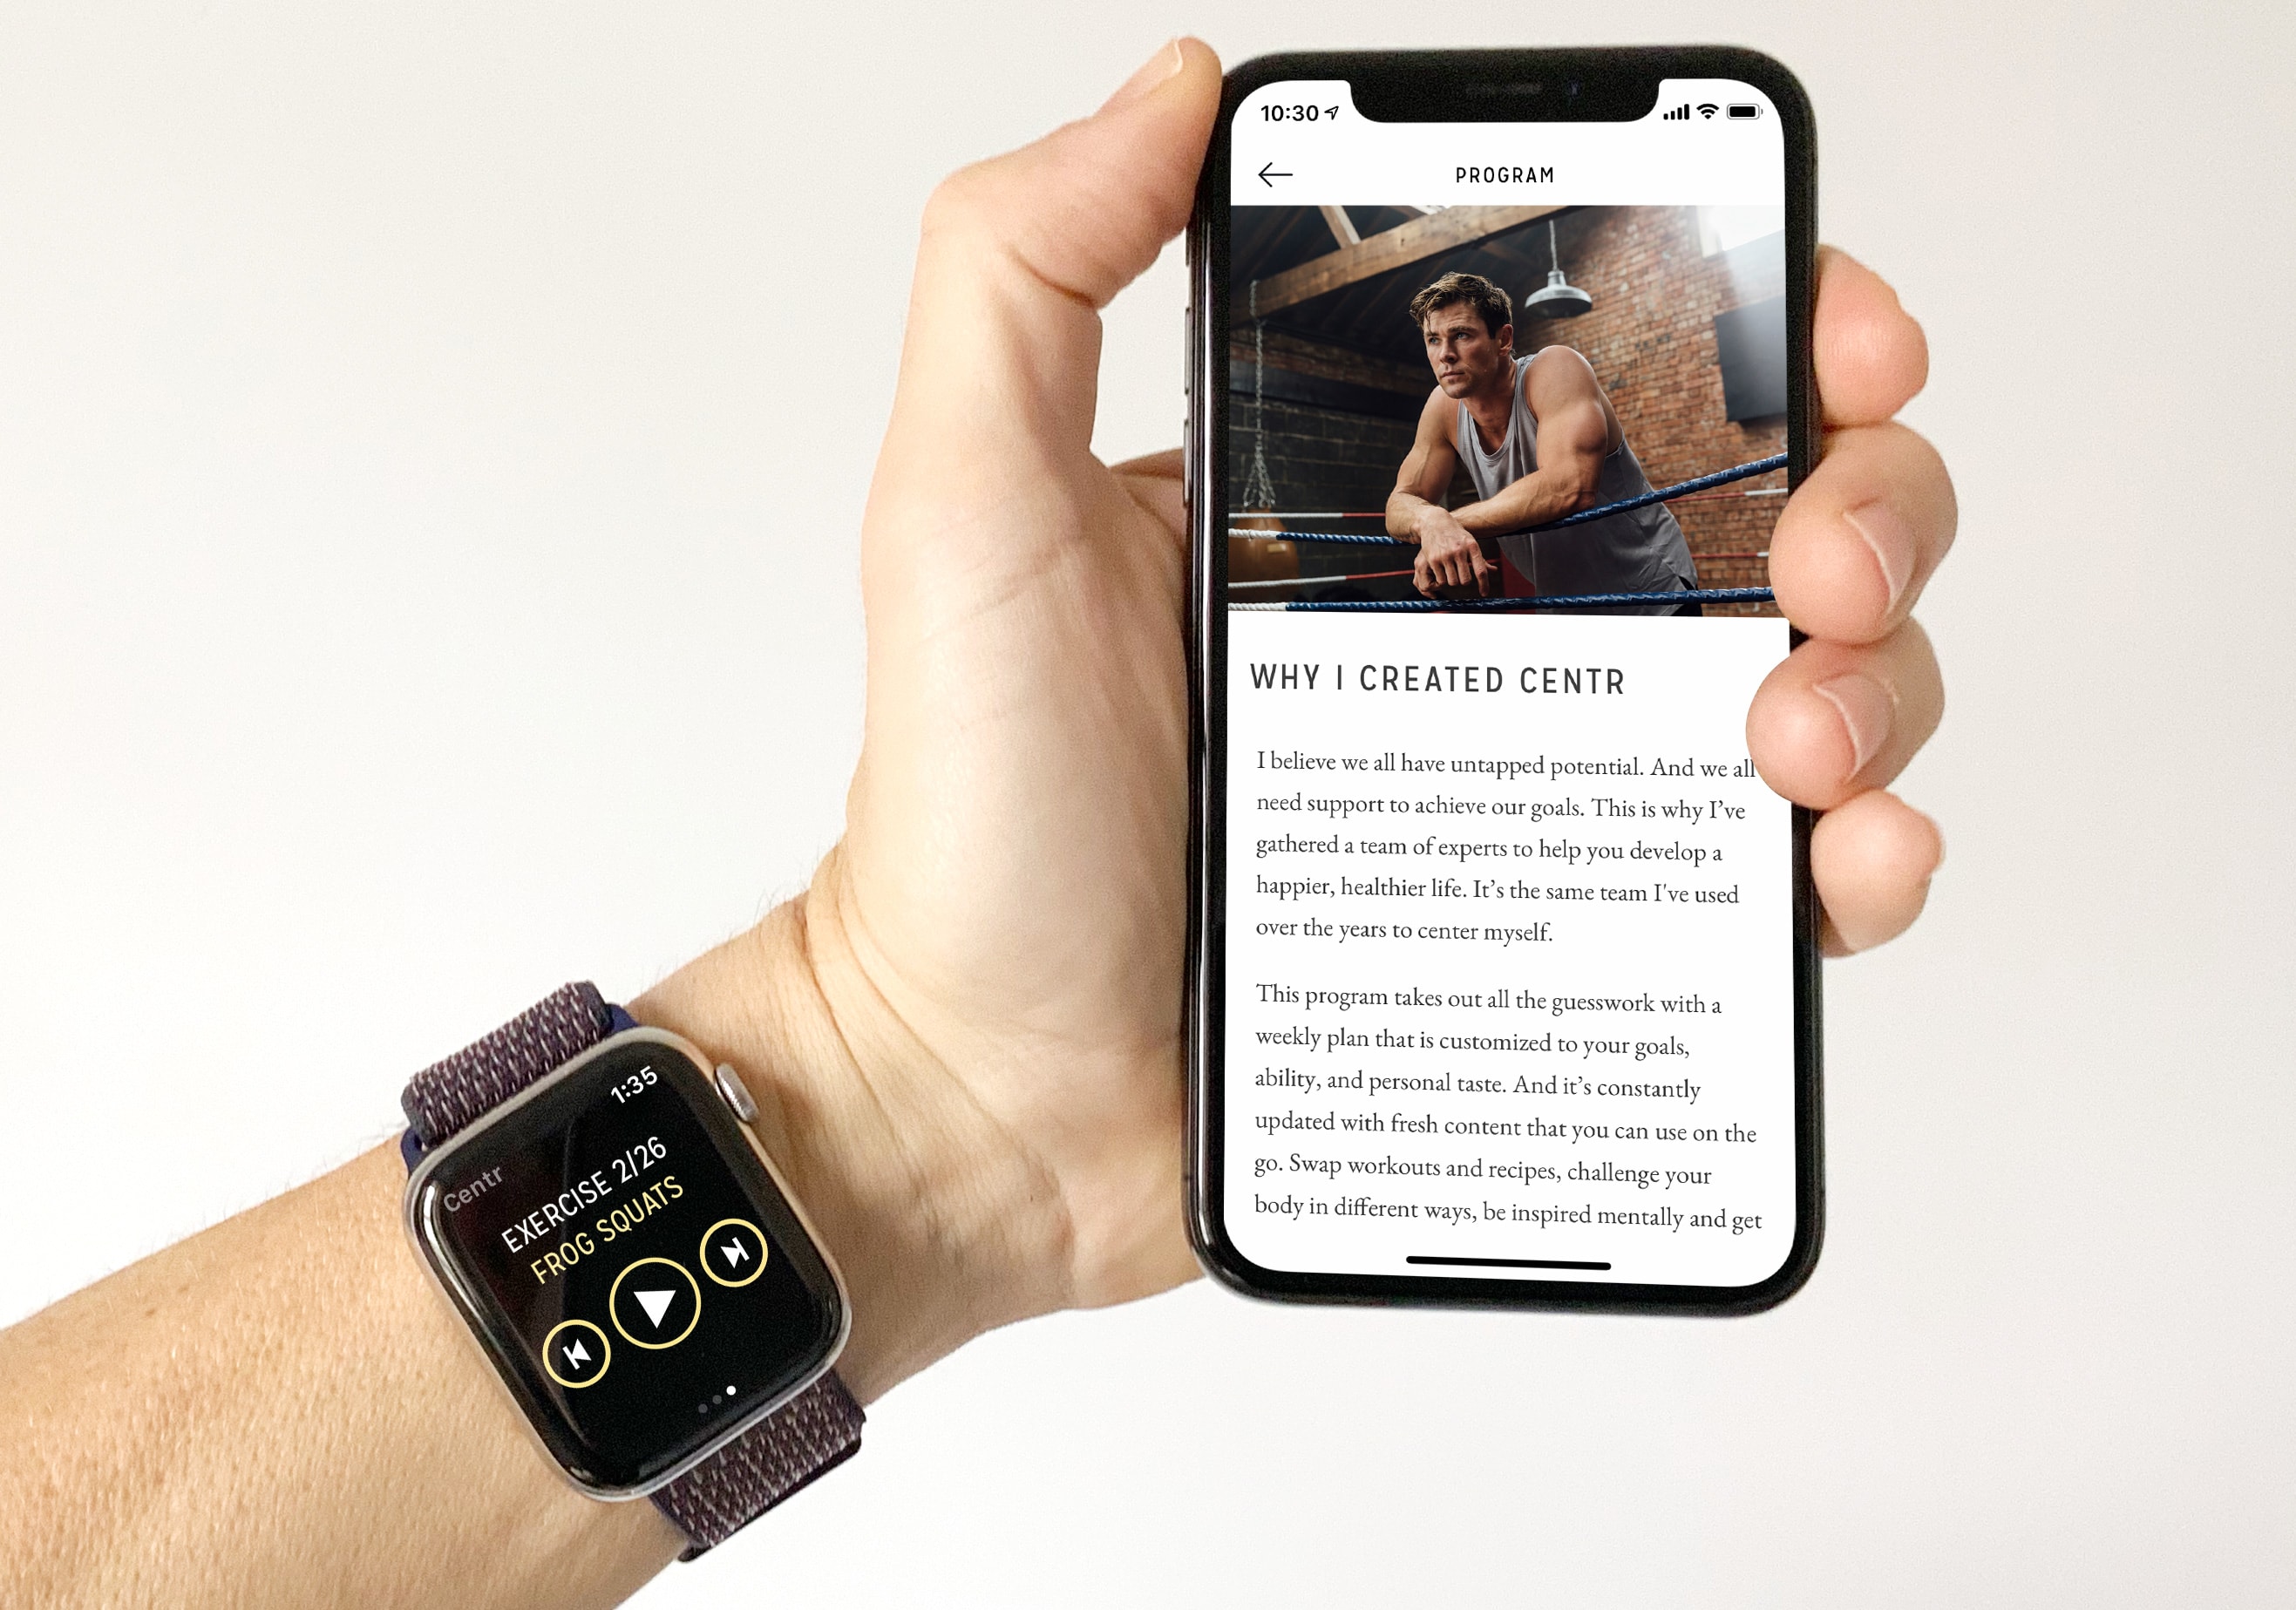 Centr is a new fitness app by Avengers star Chris Hemsworth